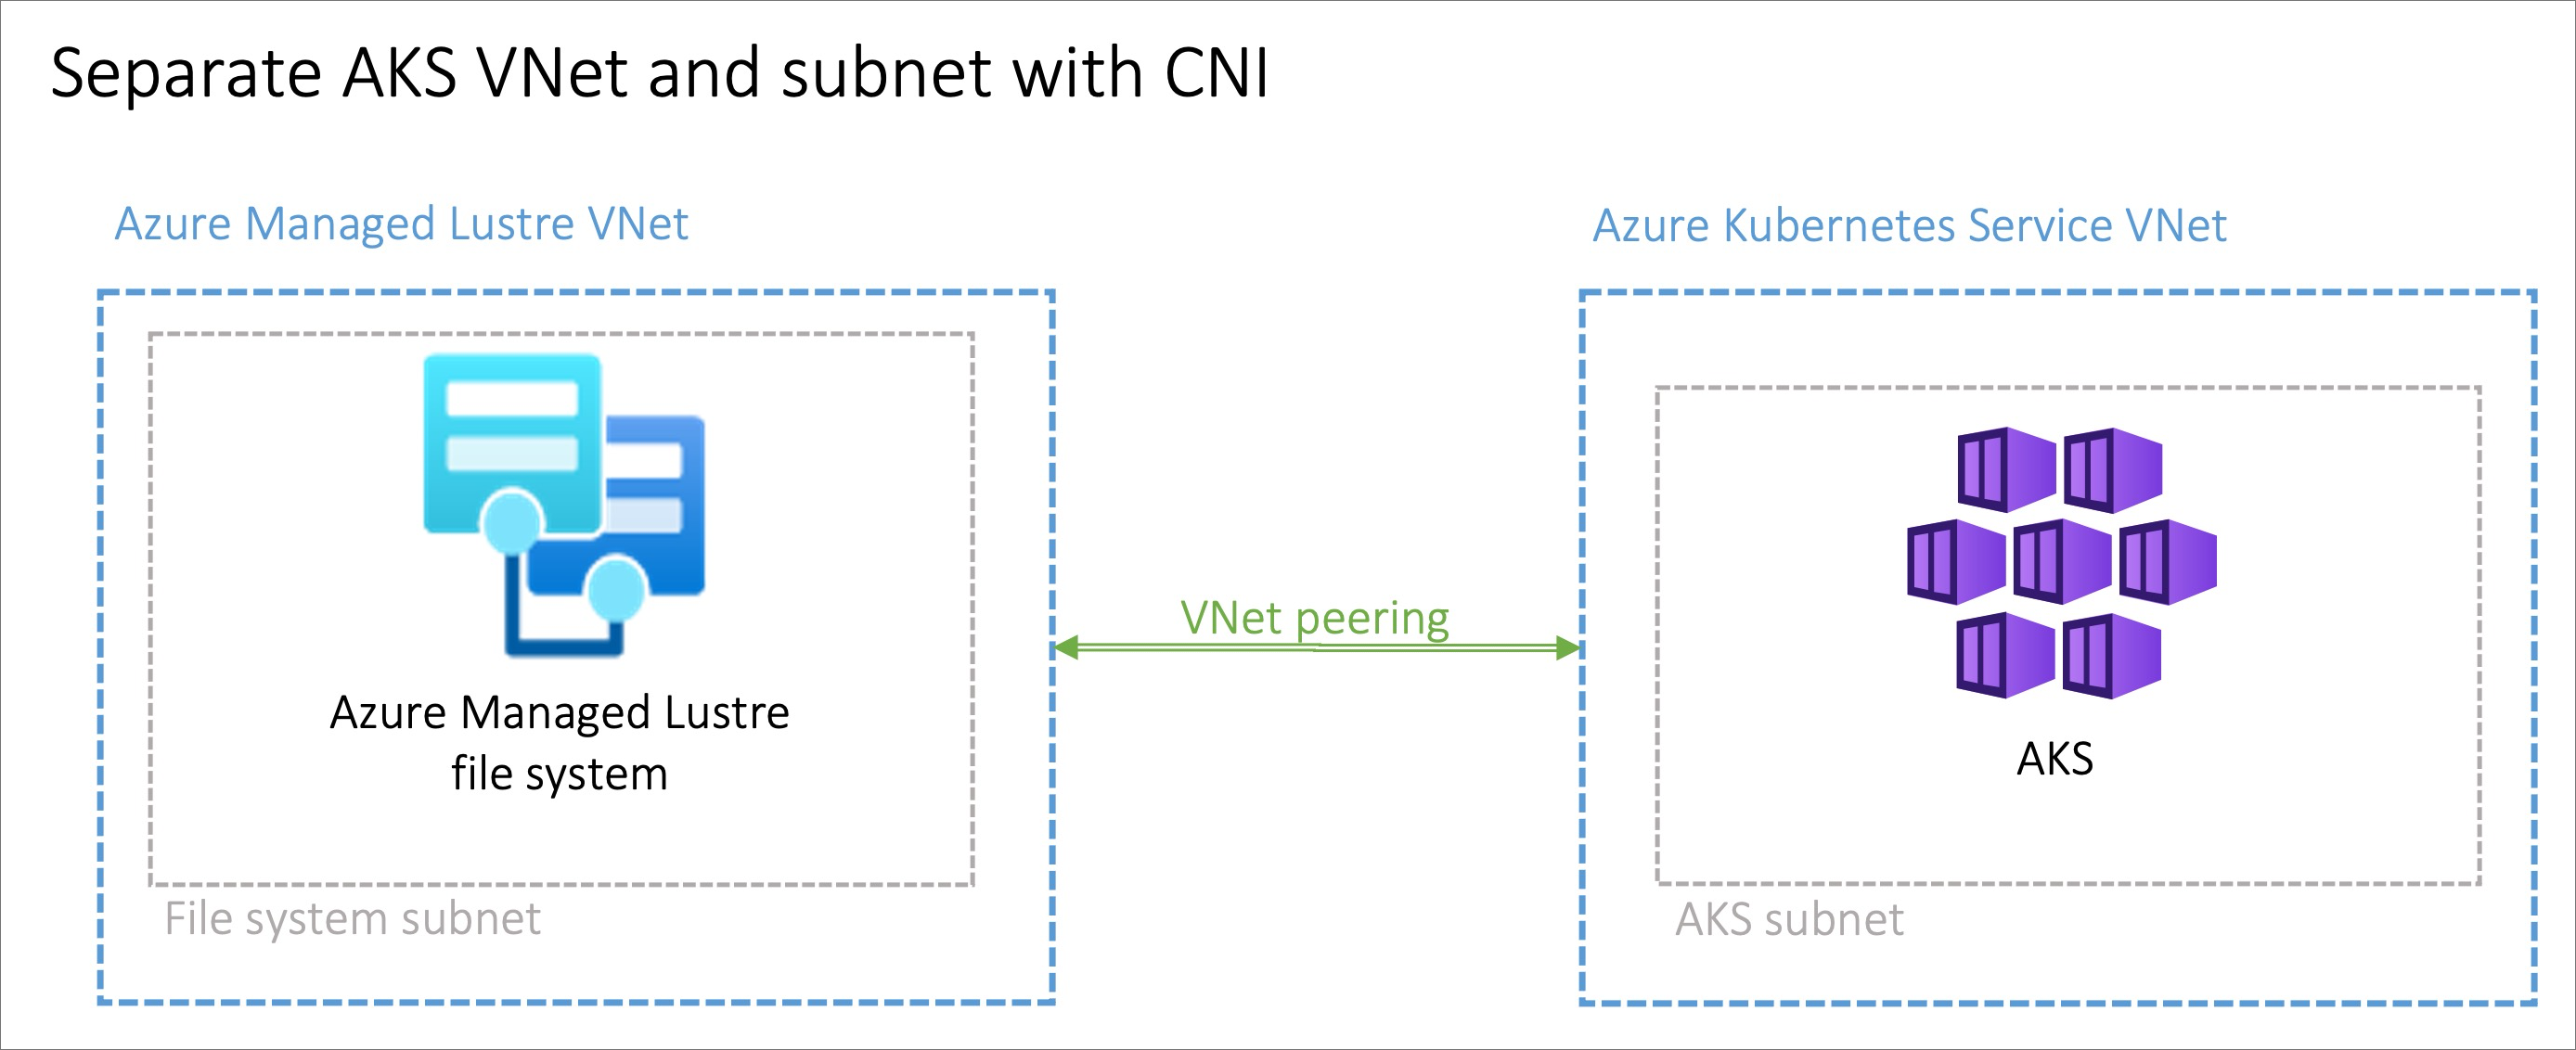 Diagram showing two VNets, one for Azure Managed Lustre and one for AKS, with a VNet peering arrow connecting them.